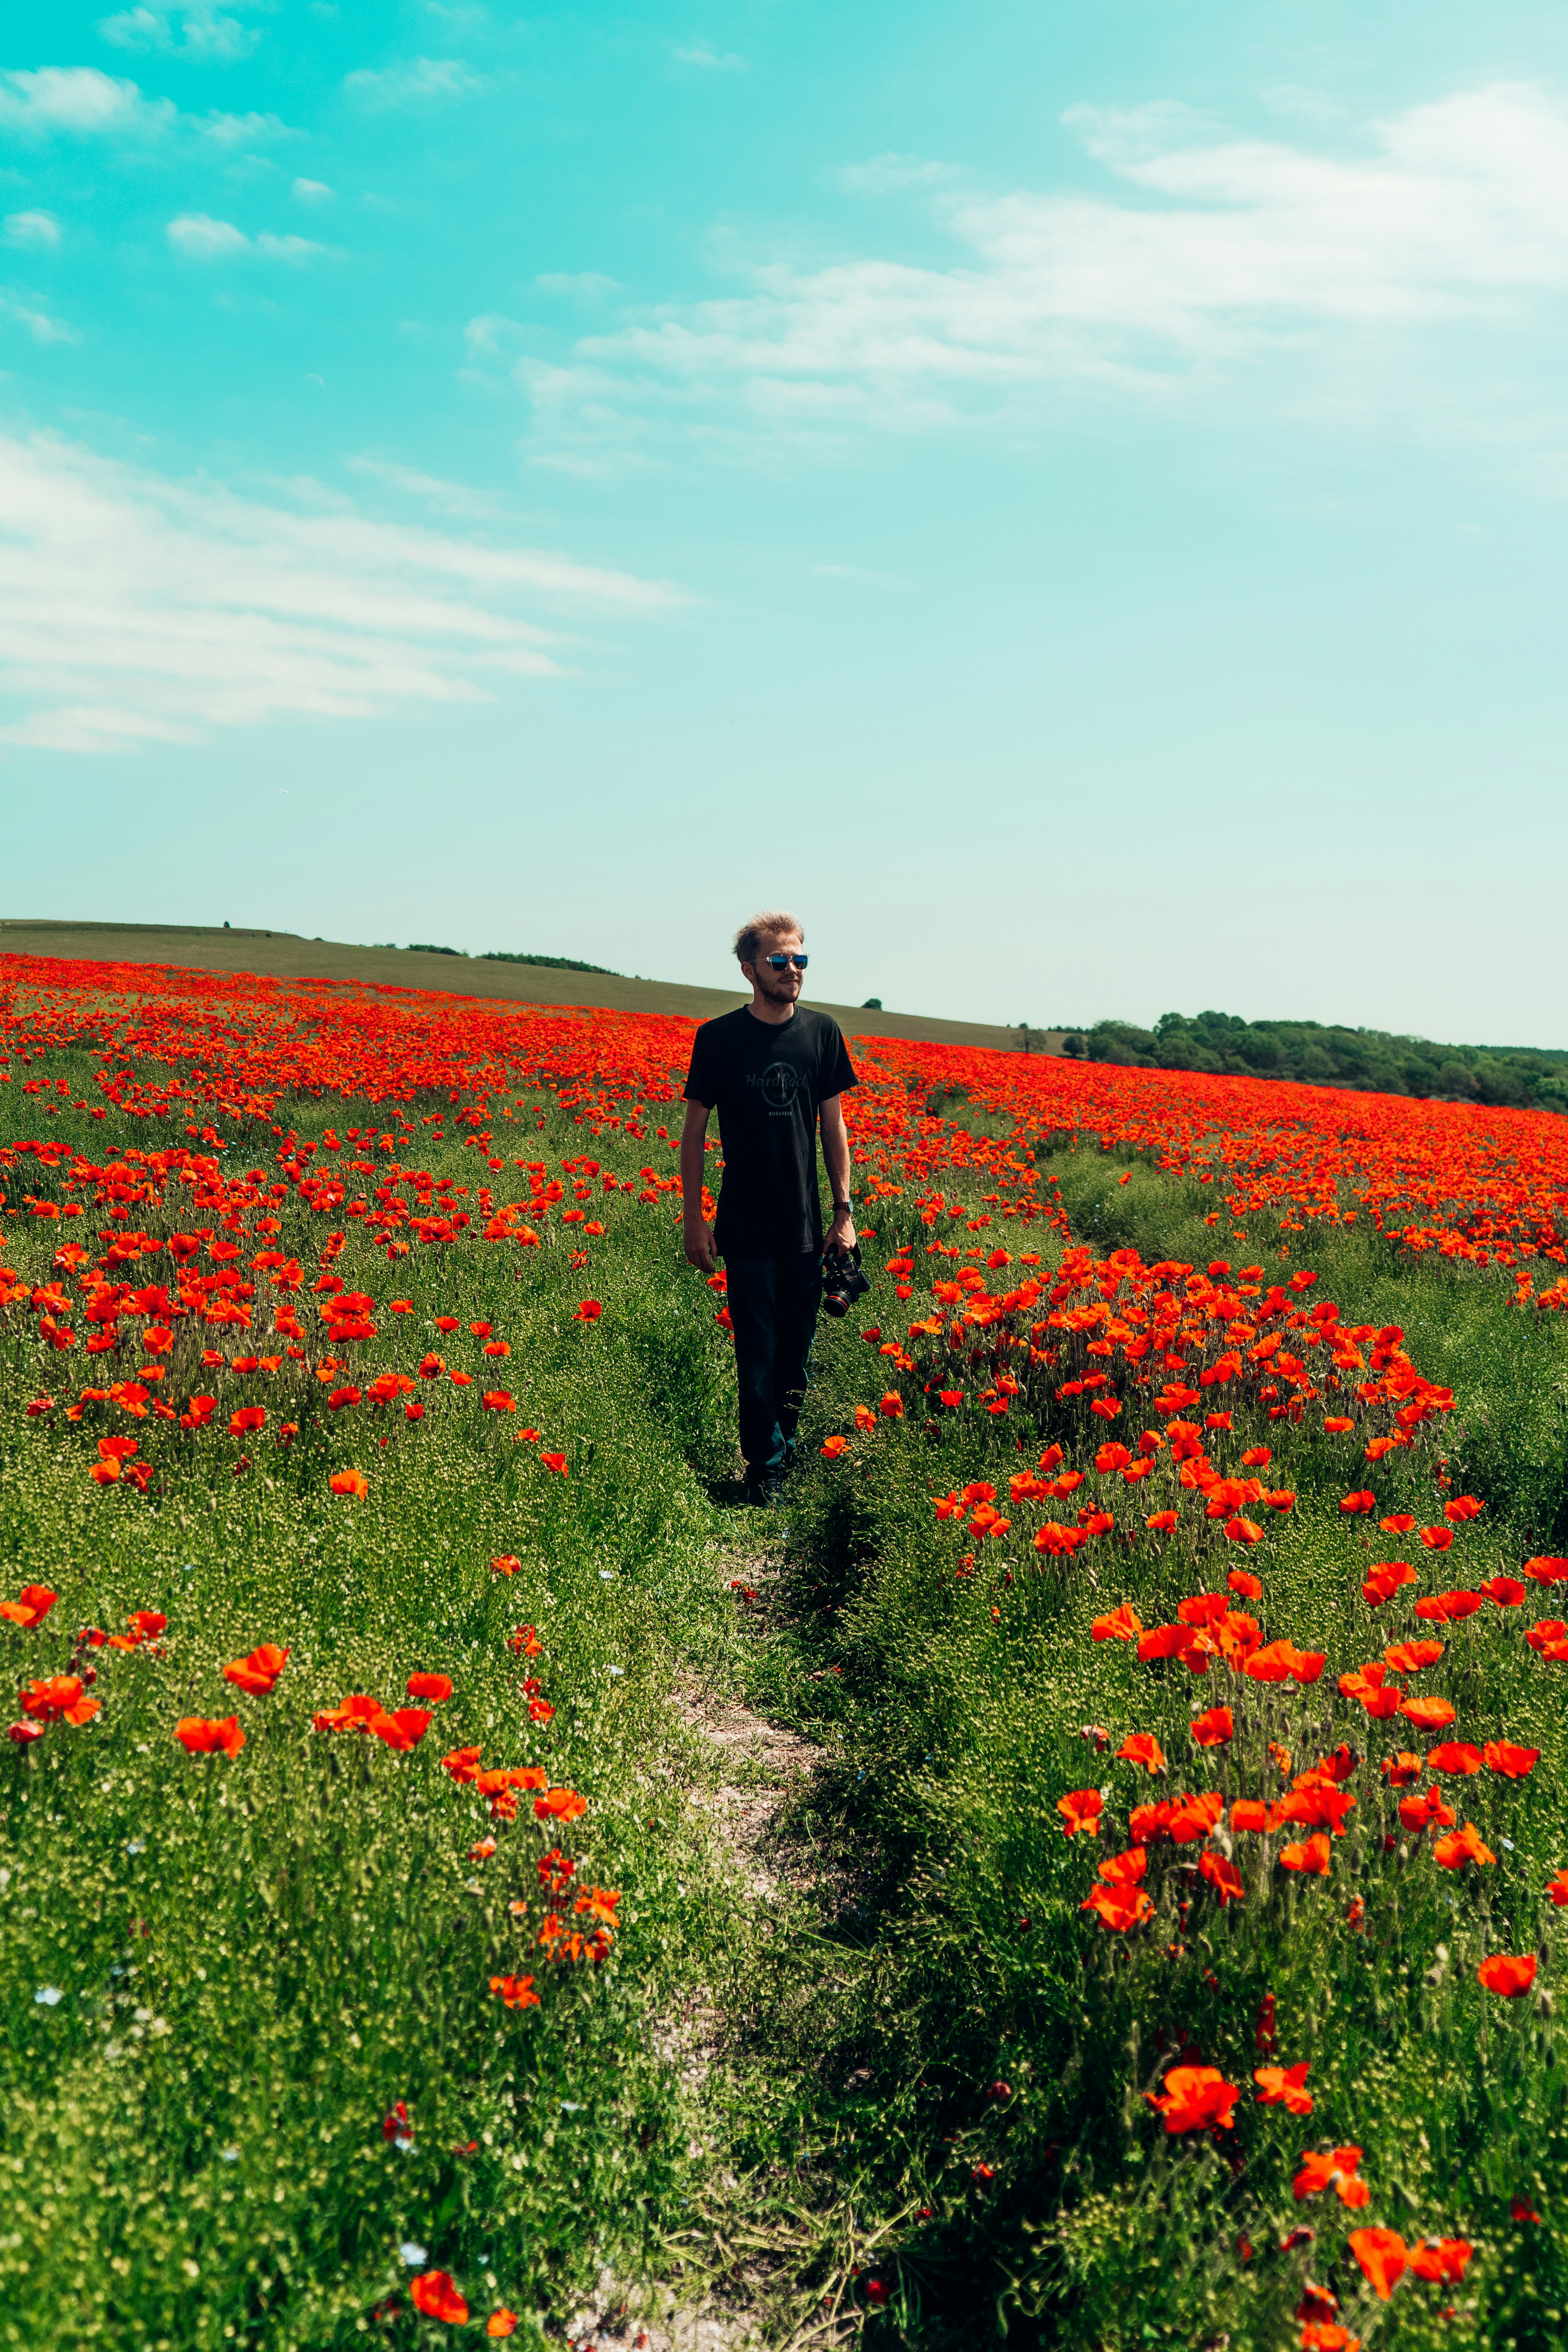 man in black jacket standing on red flower field during daytime